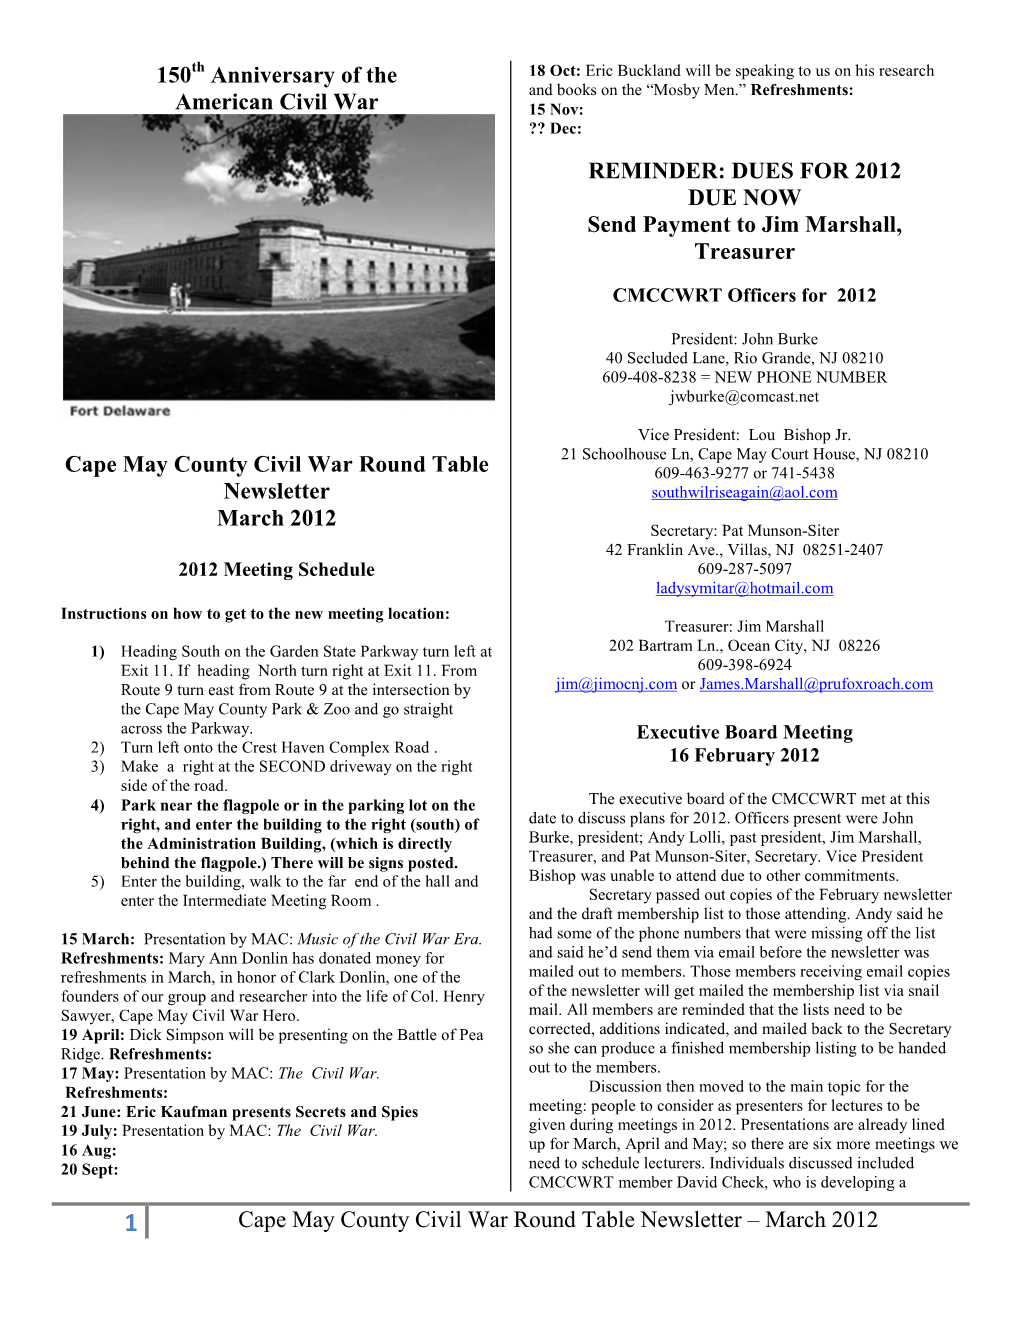 Cape May County Civil War Round Table Newsletter – March 2012 150 Anniversary of the American Civil War Cape May County Civil